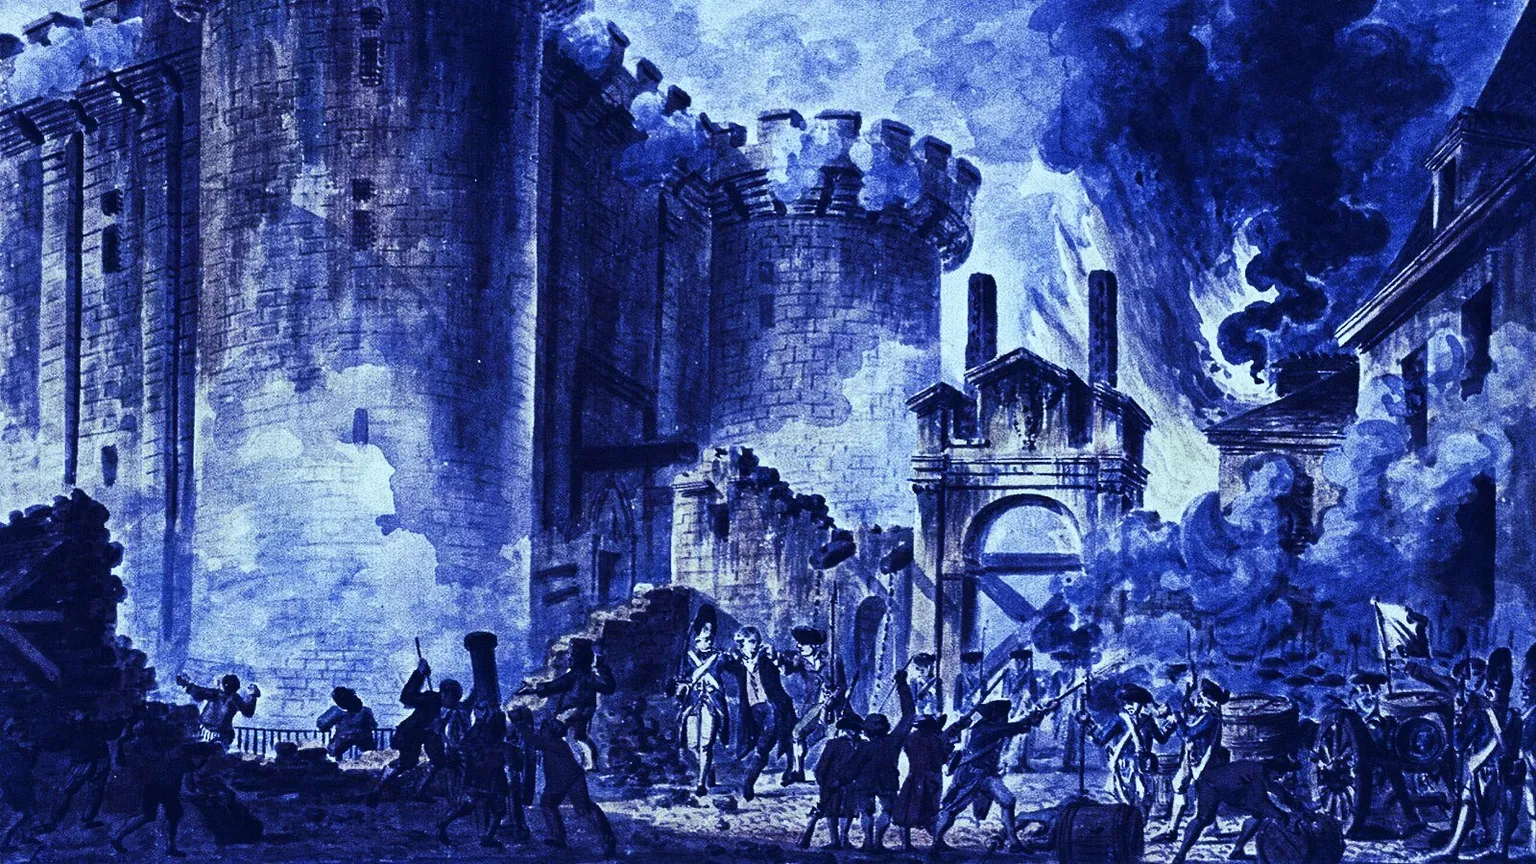 After the French Revolution, the SEC deemed the promise of liberté, égalité, and fraternité an unregistered security. PHOTO CREDIT: National Library of France